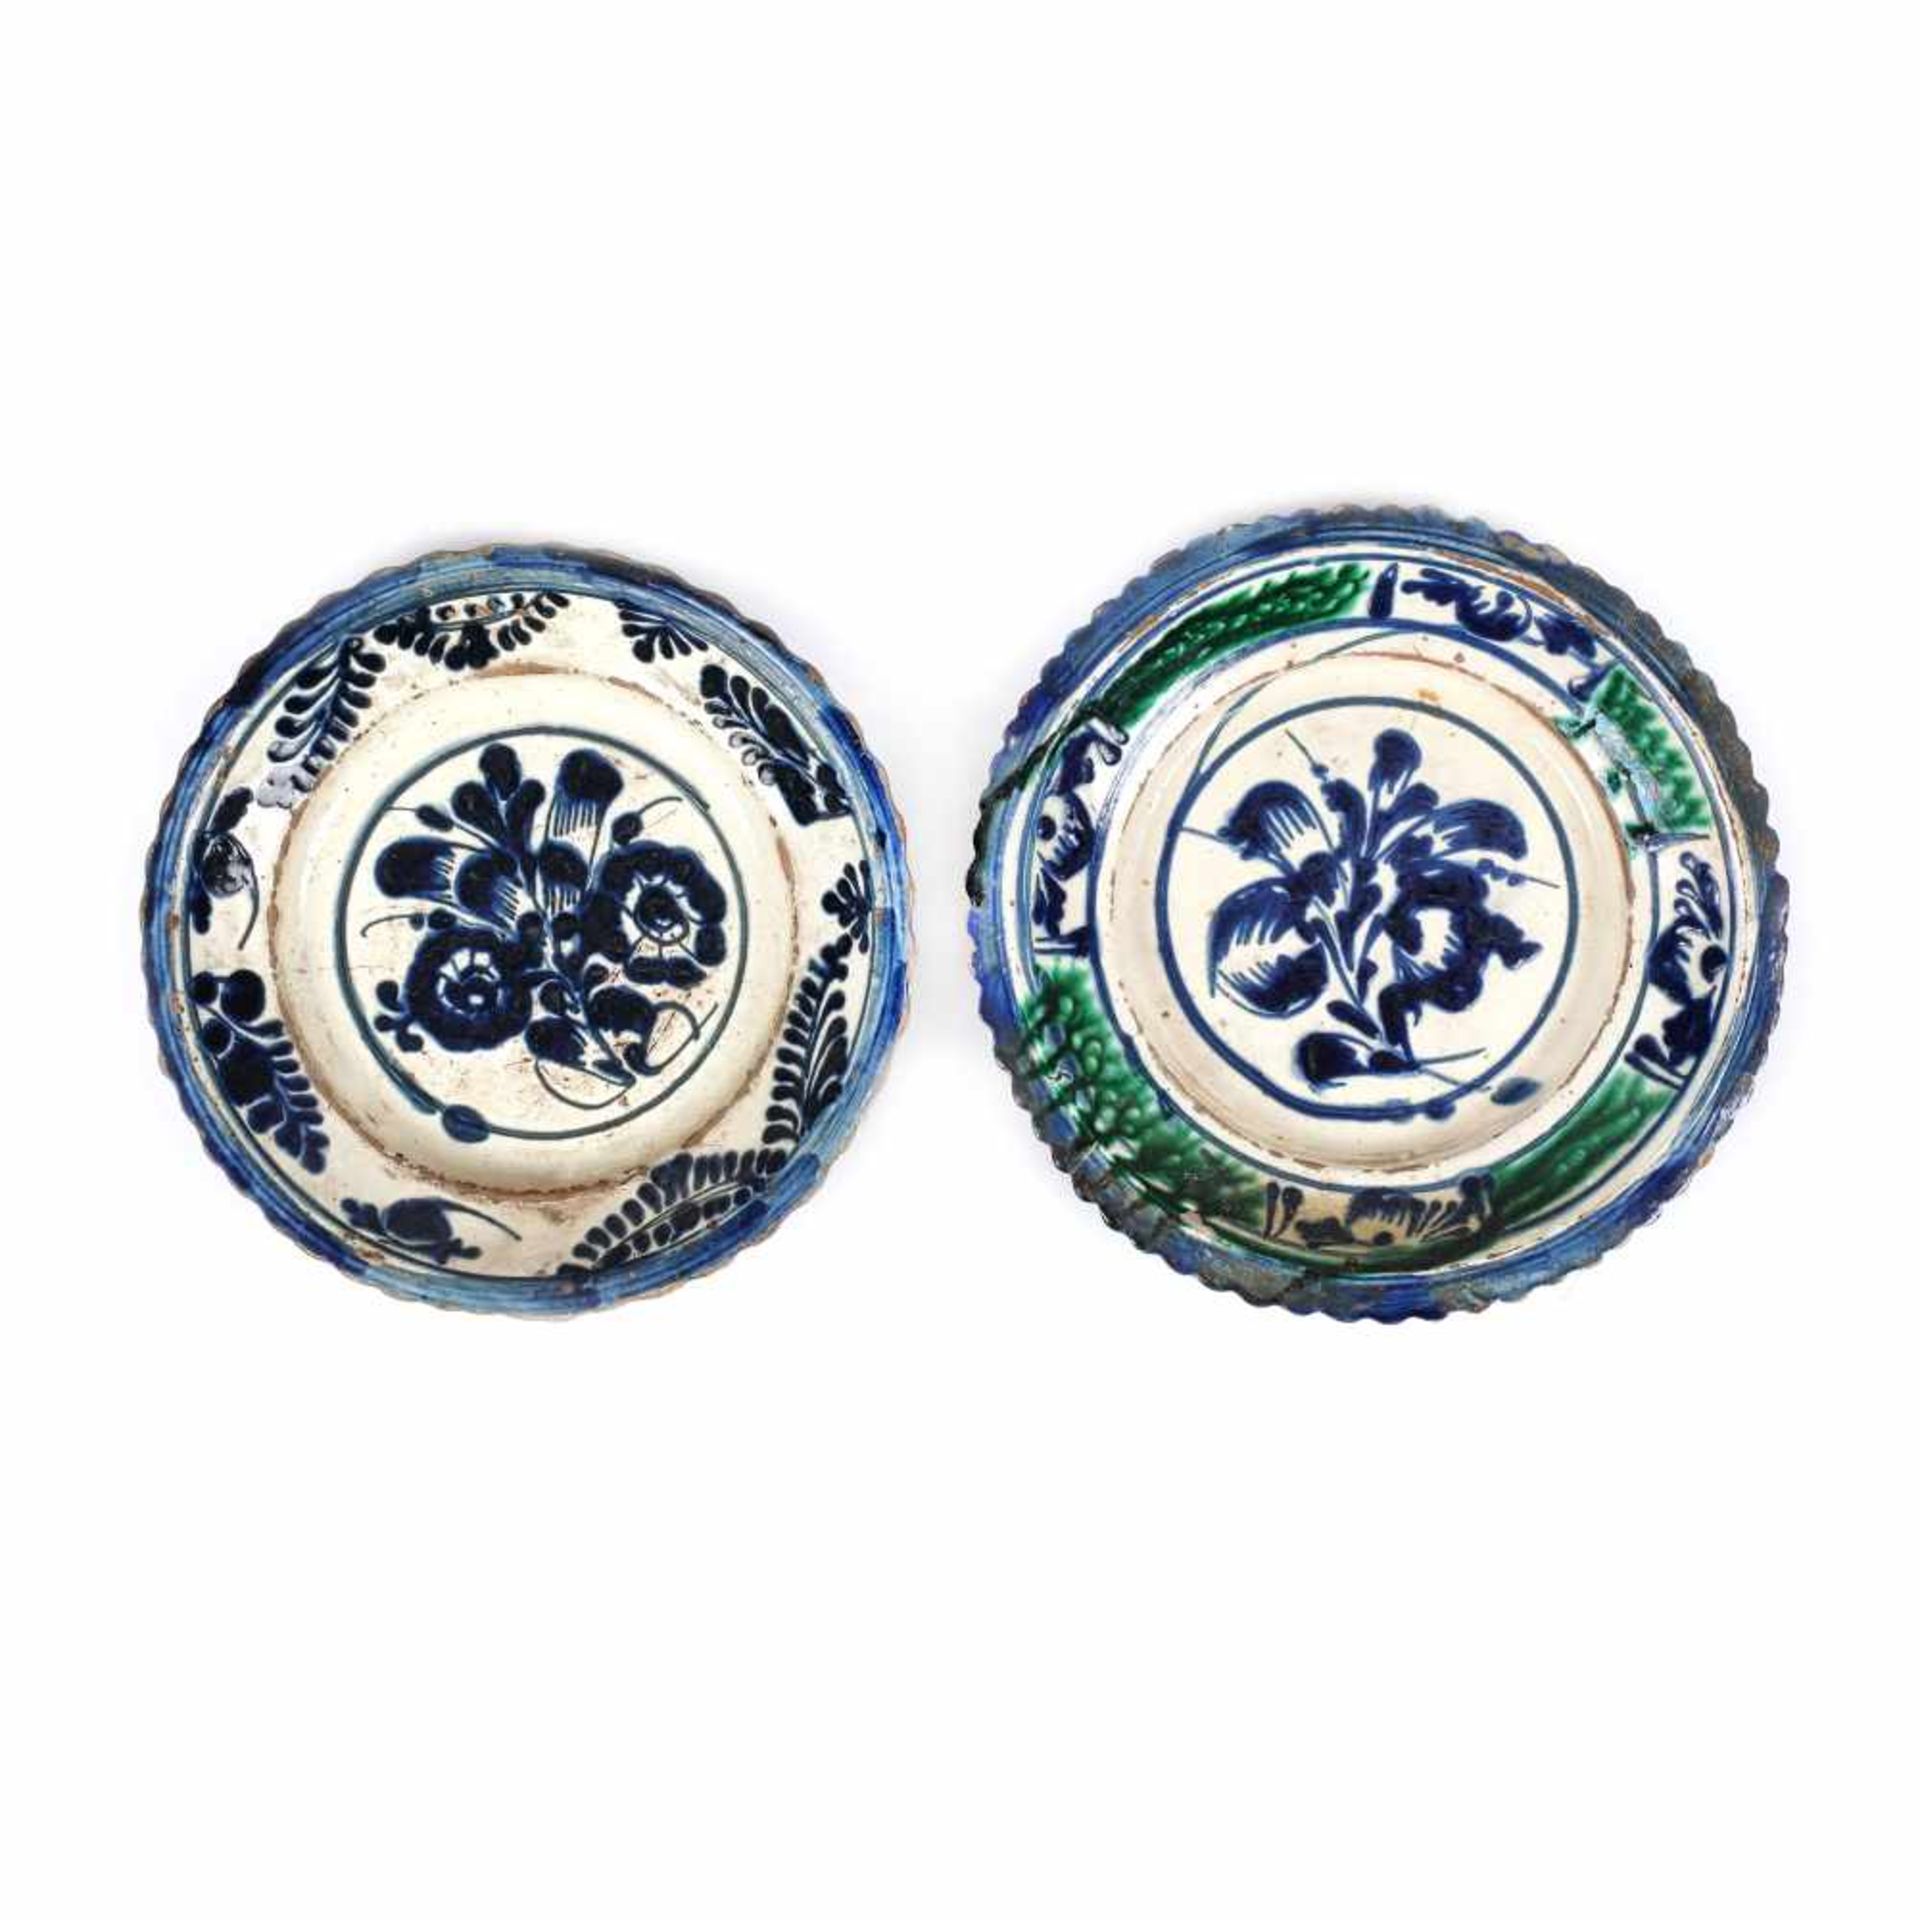 Pair of plates, decorated with stylised floral motifs, Turda, mid-19th century